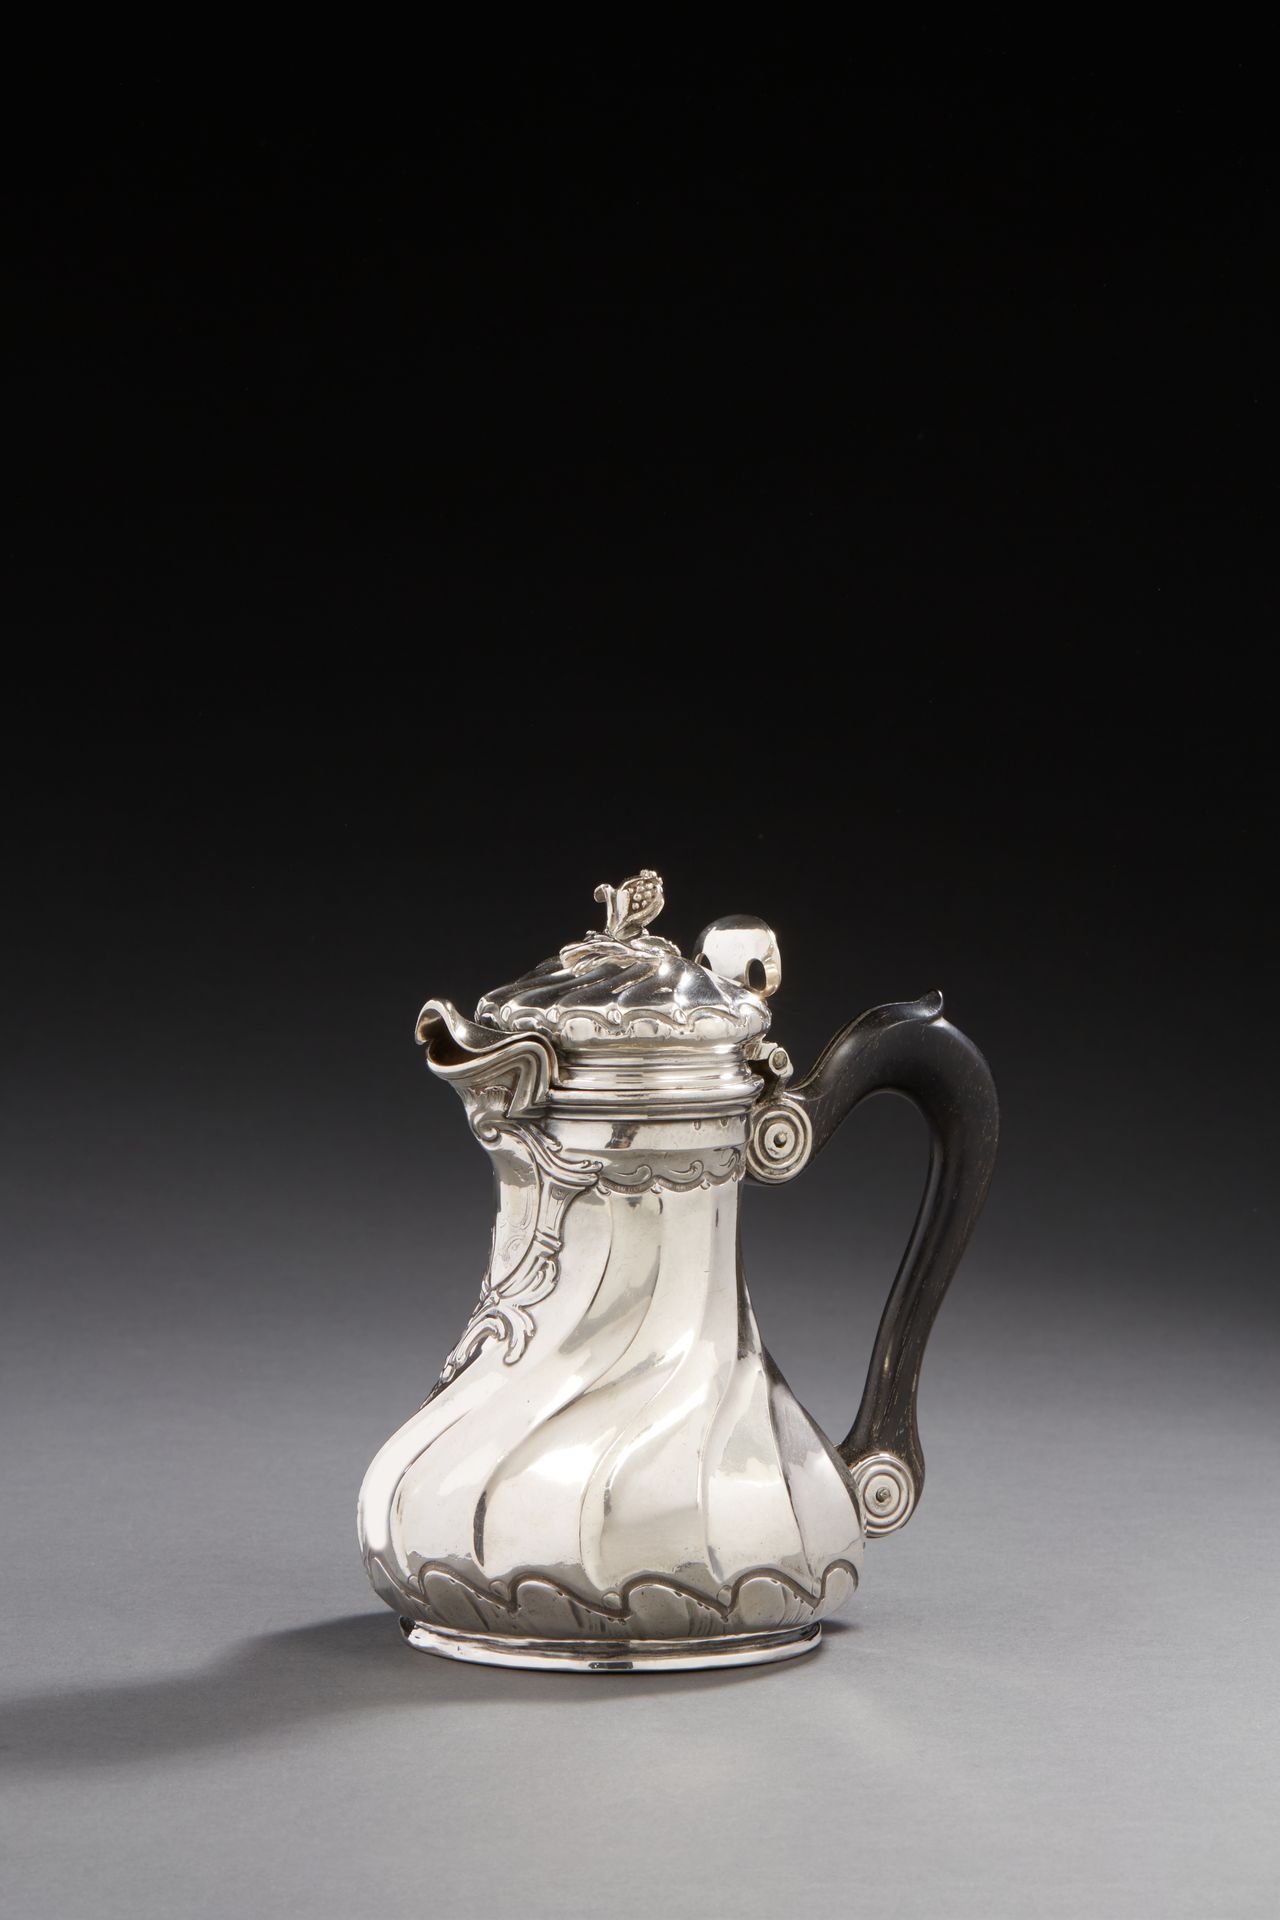 Null PARIS 1759 - 1760
A silver flat-bottomed pourer called a marabout, with twi&hellip;